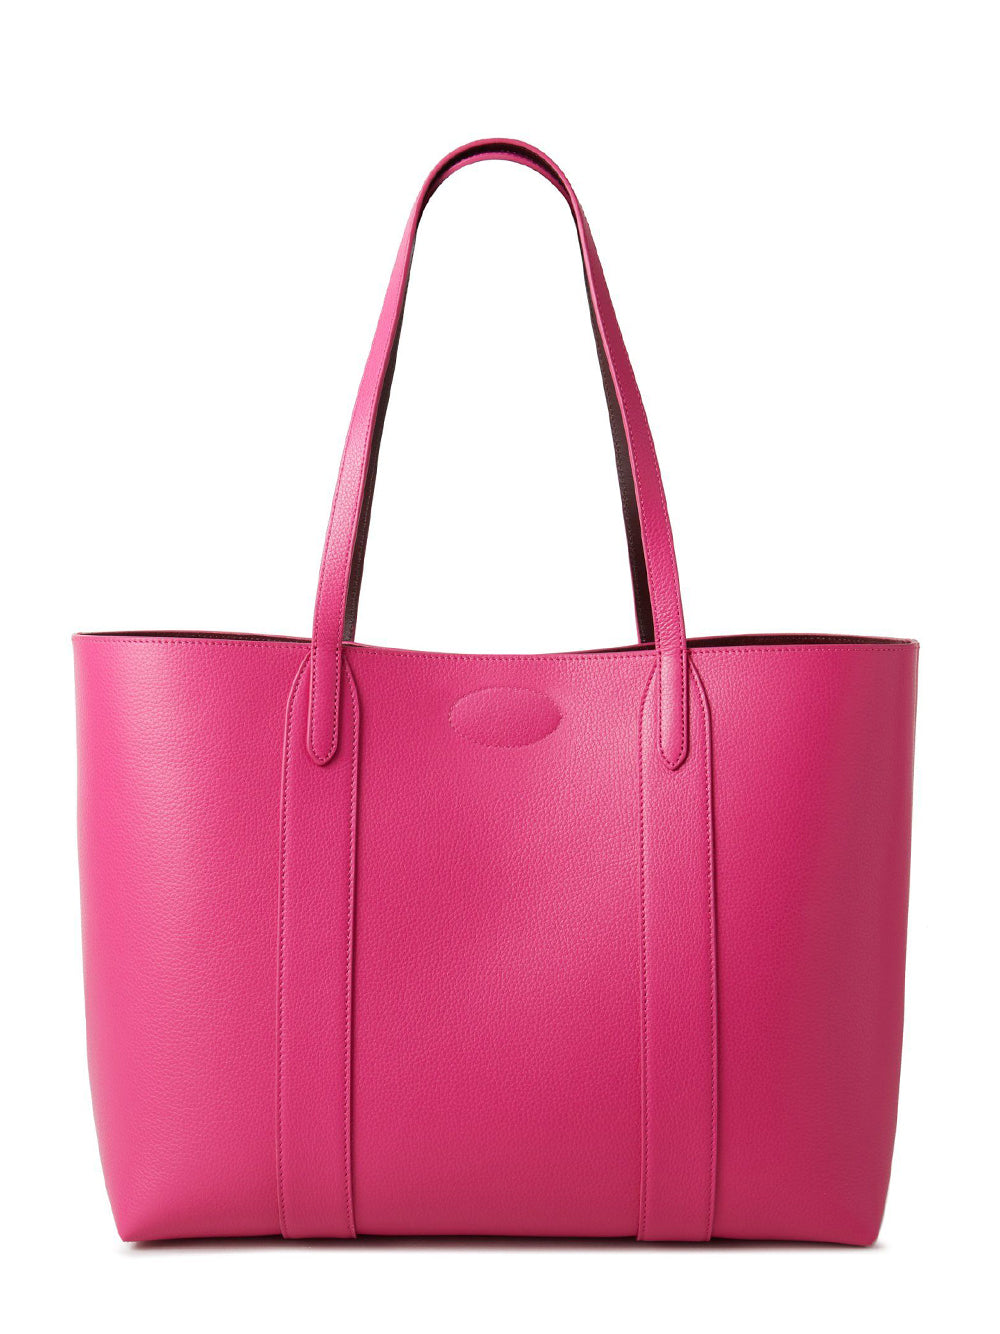 MULBERRY-Bayswater-Tote-Mulberry-Pink-Small-Classic-Grain-2